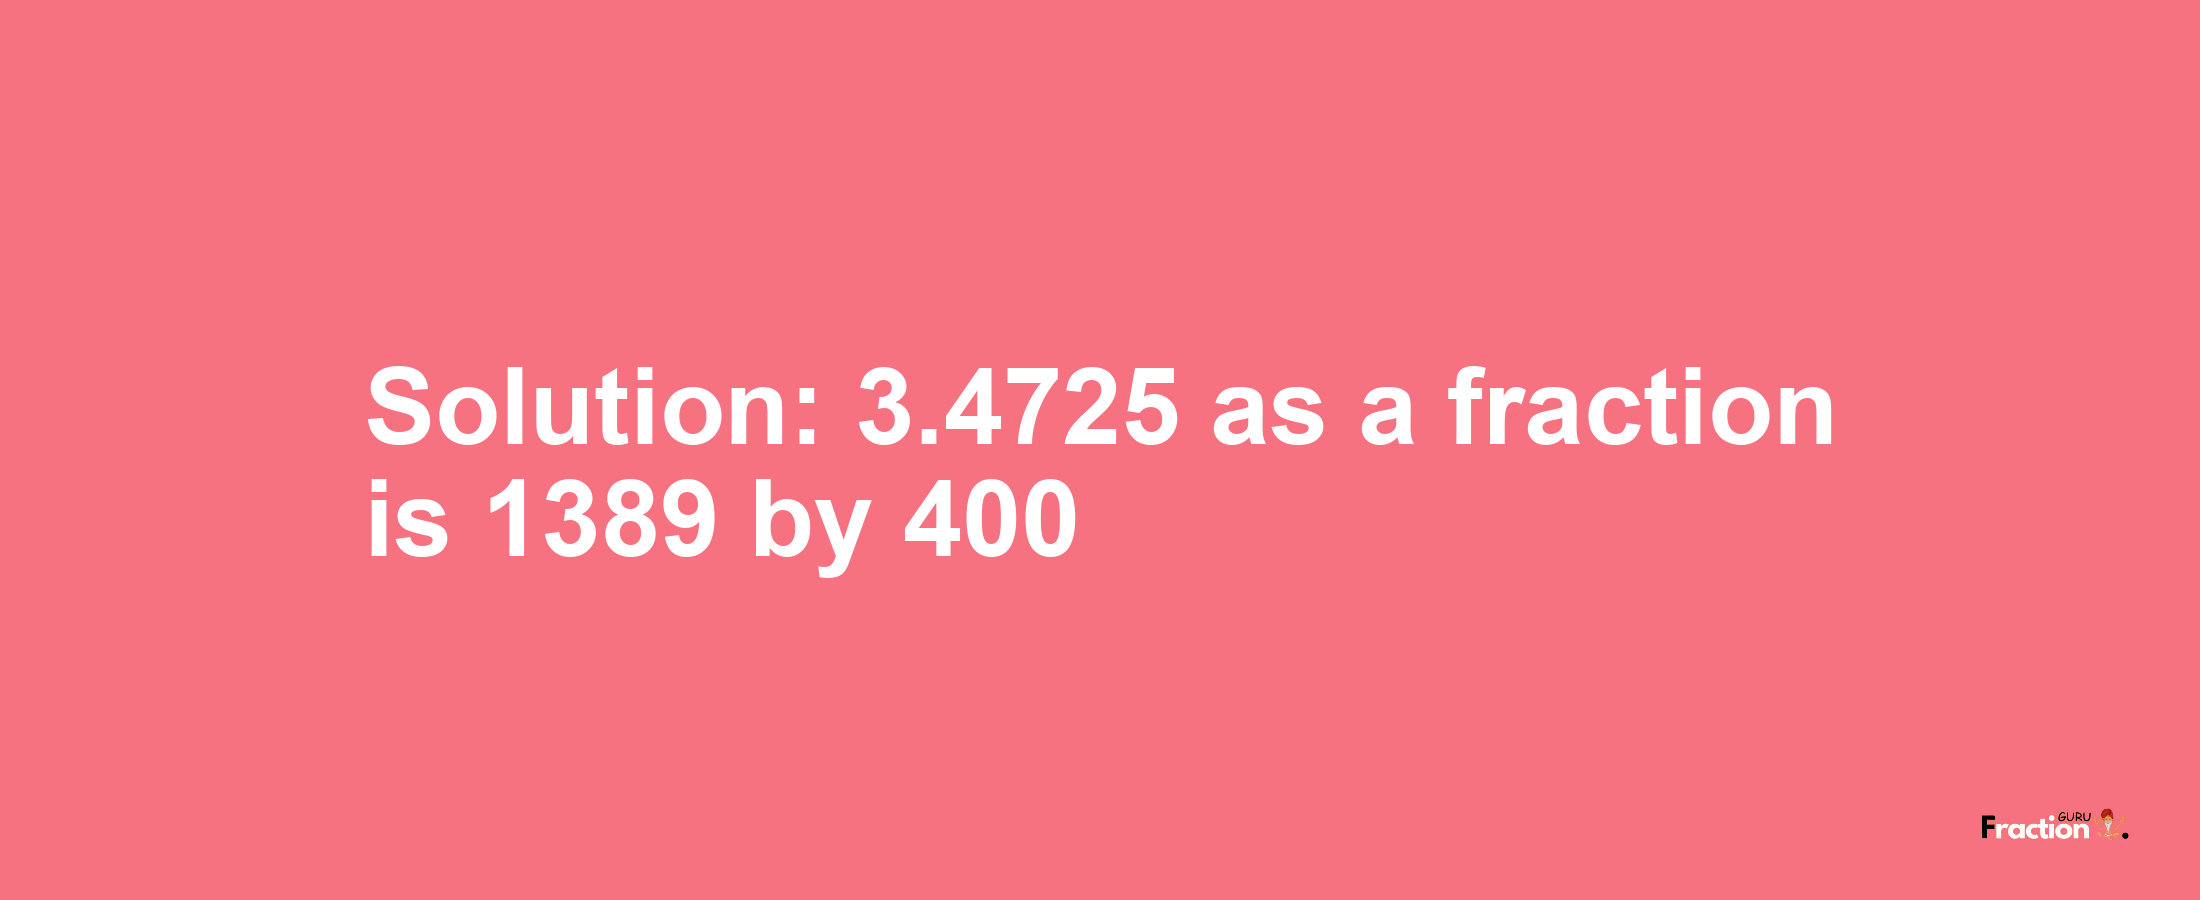 Solution:3.4725 as a fraction is 1389/400